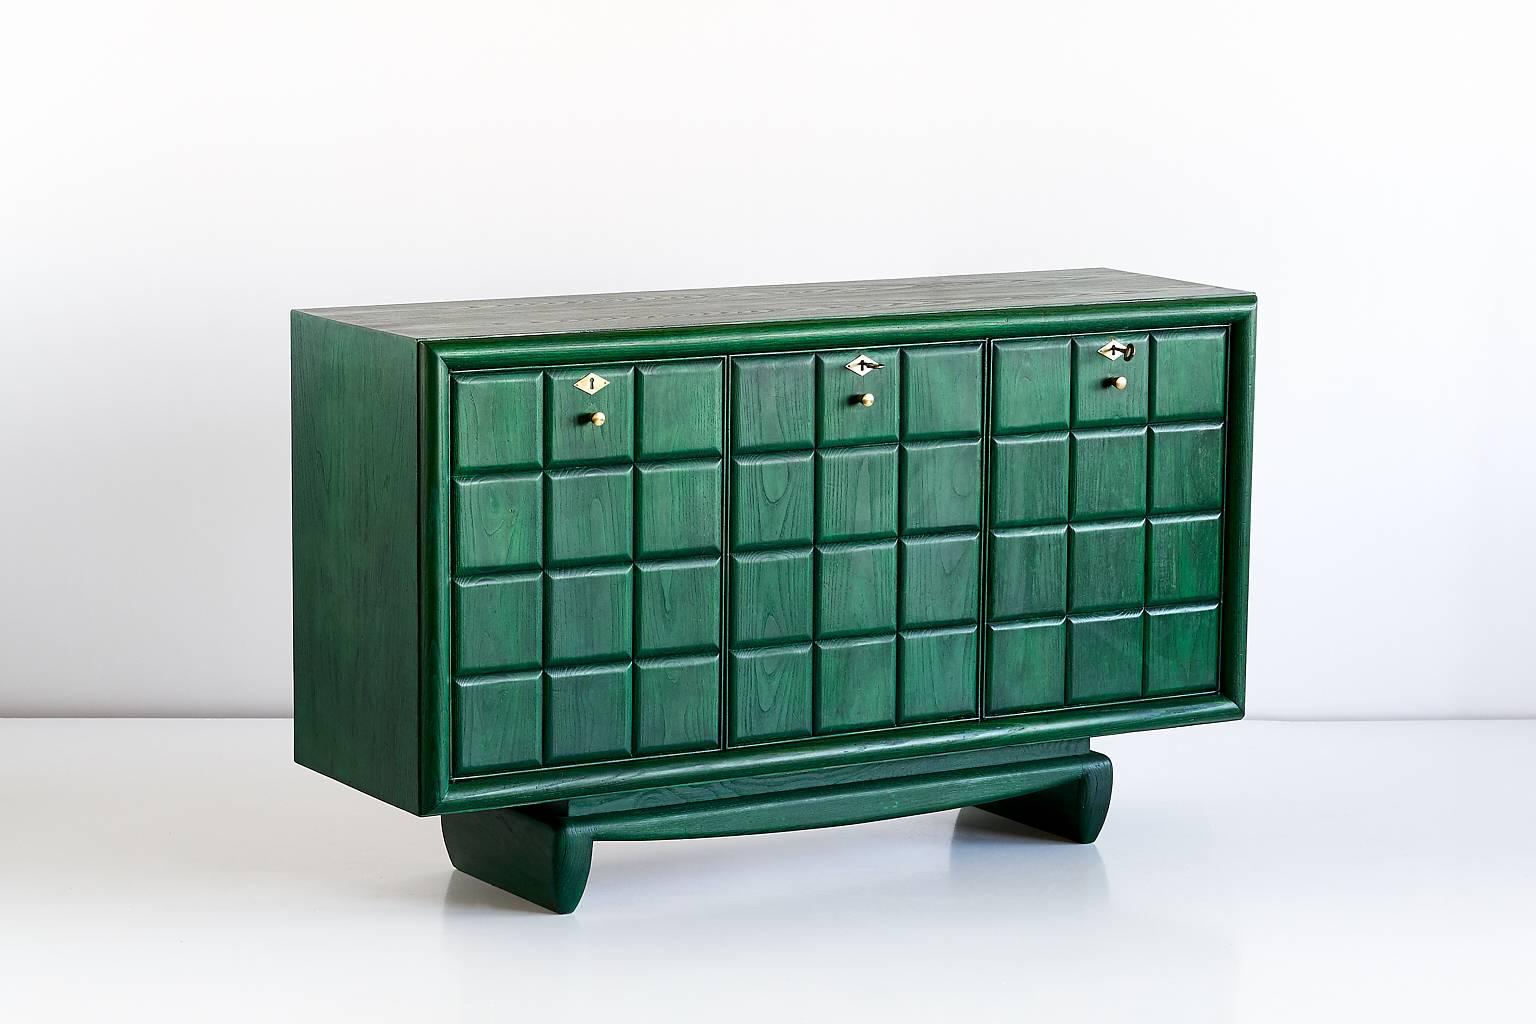 Painted Green Italian Art Deco Cabinet Designed for a Florentine Residence